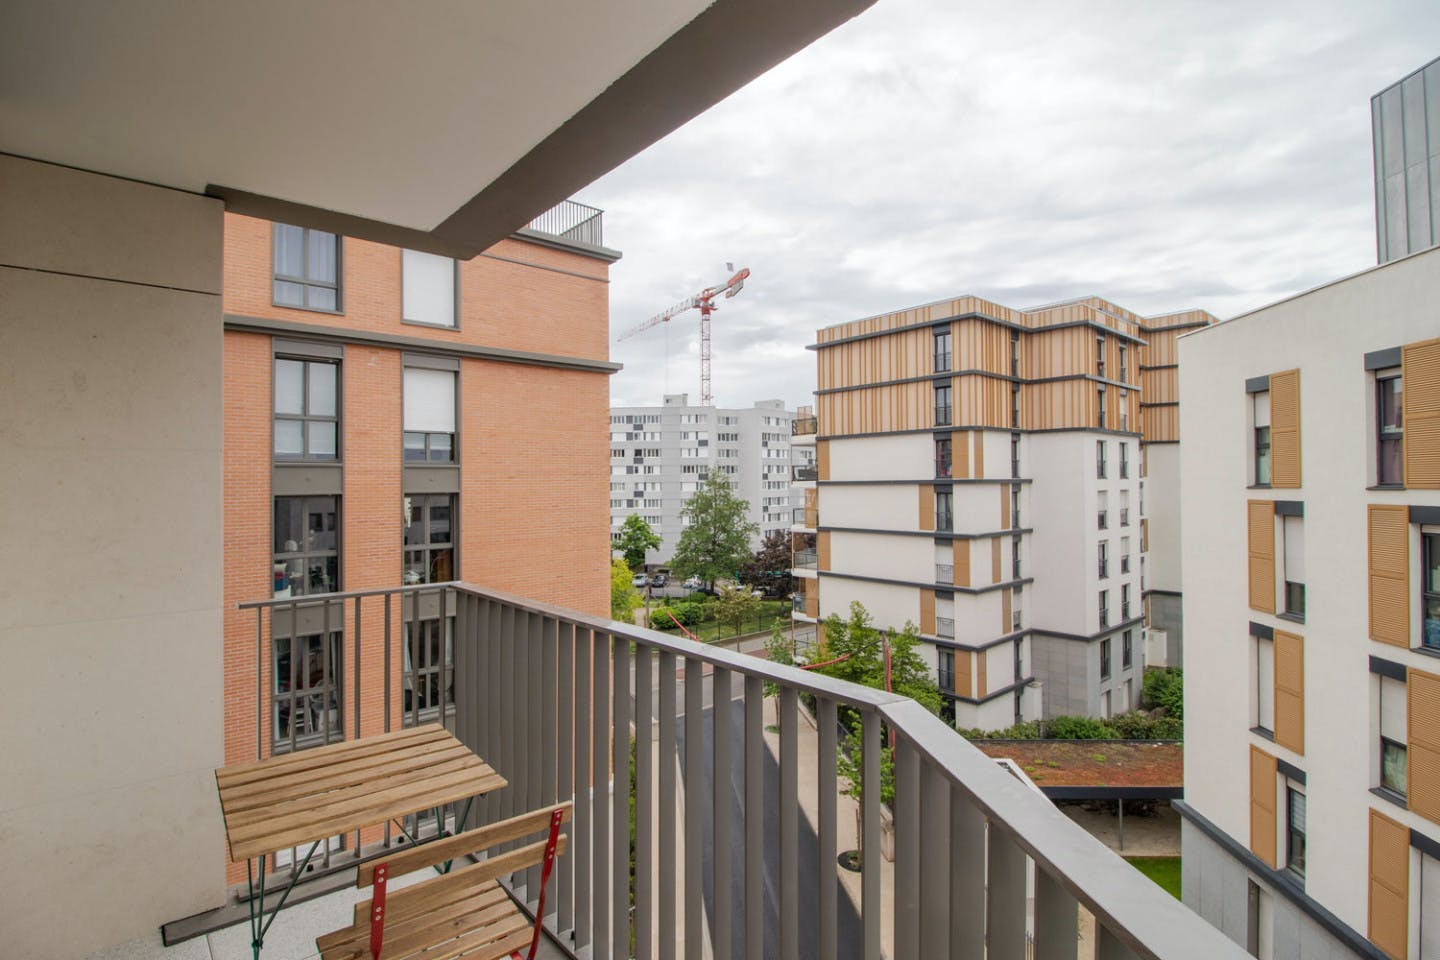 Beautiful apartment near the center of Clichy